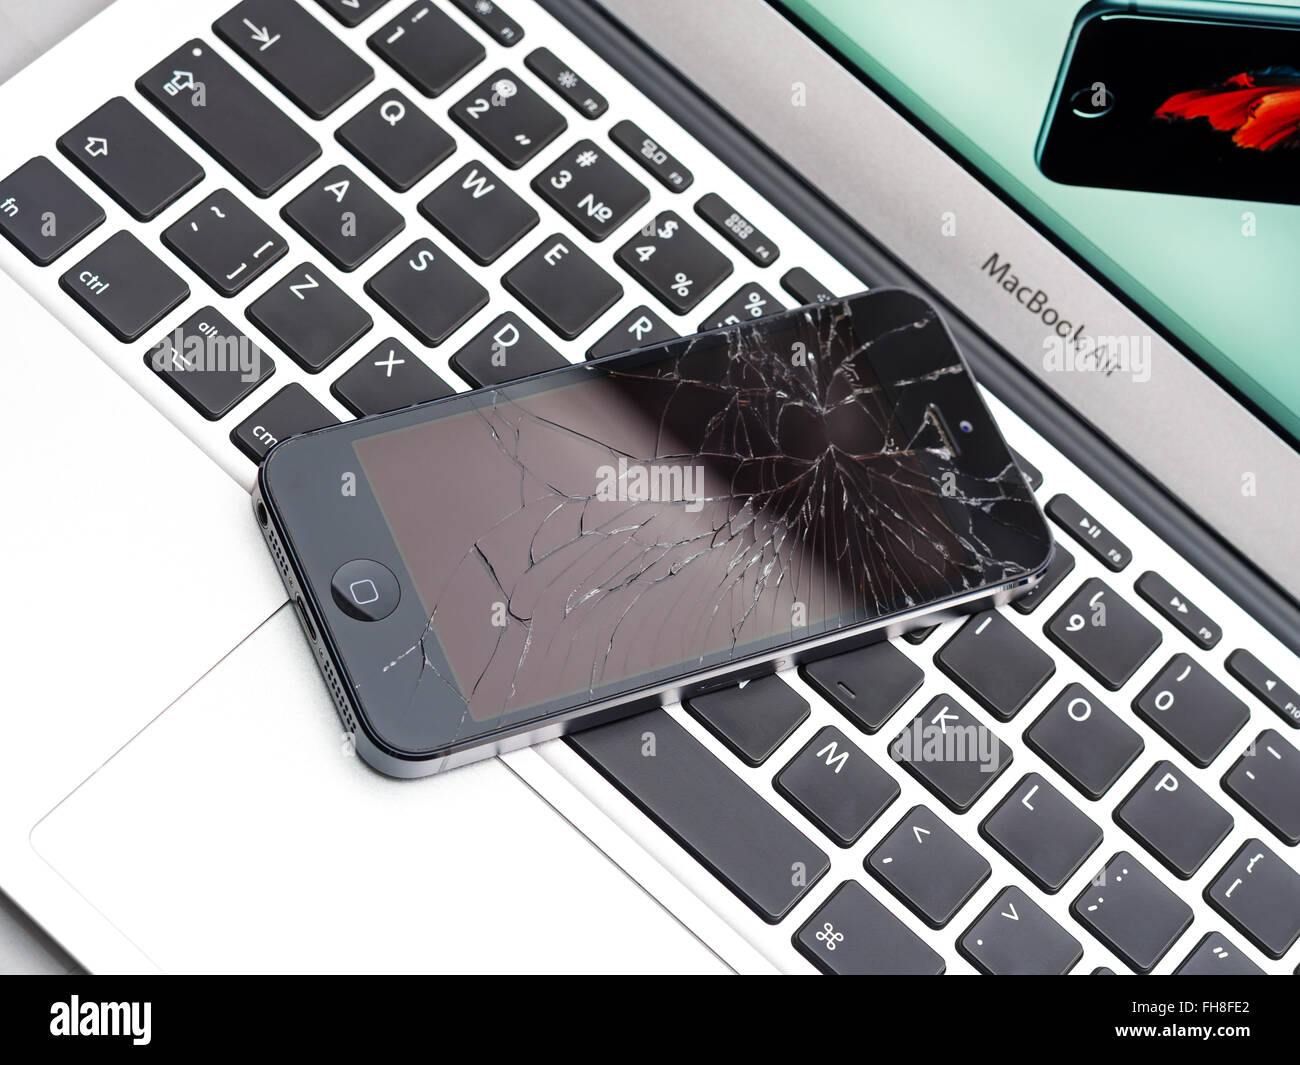 Los Angeles, CA, USA - December 07, 2015: Broken Apple iPhone with cracked screen on Apple MacBook Air laptop Stock Photo